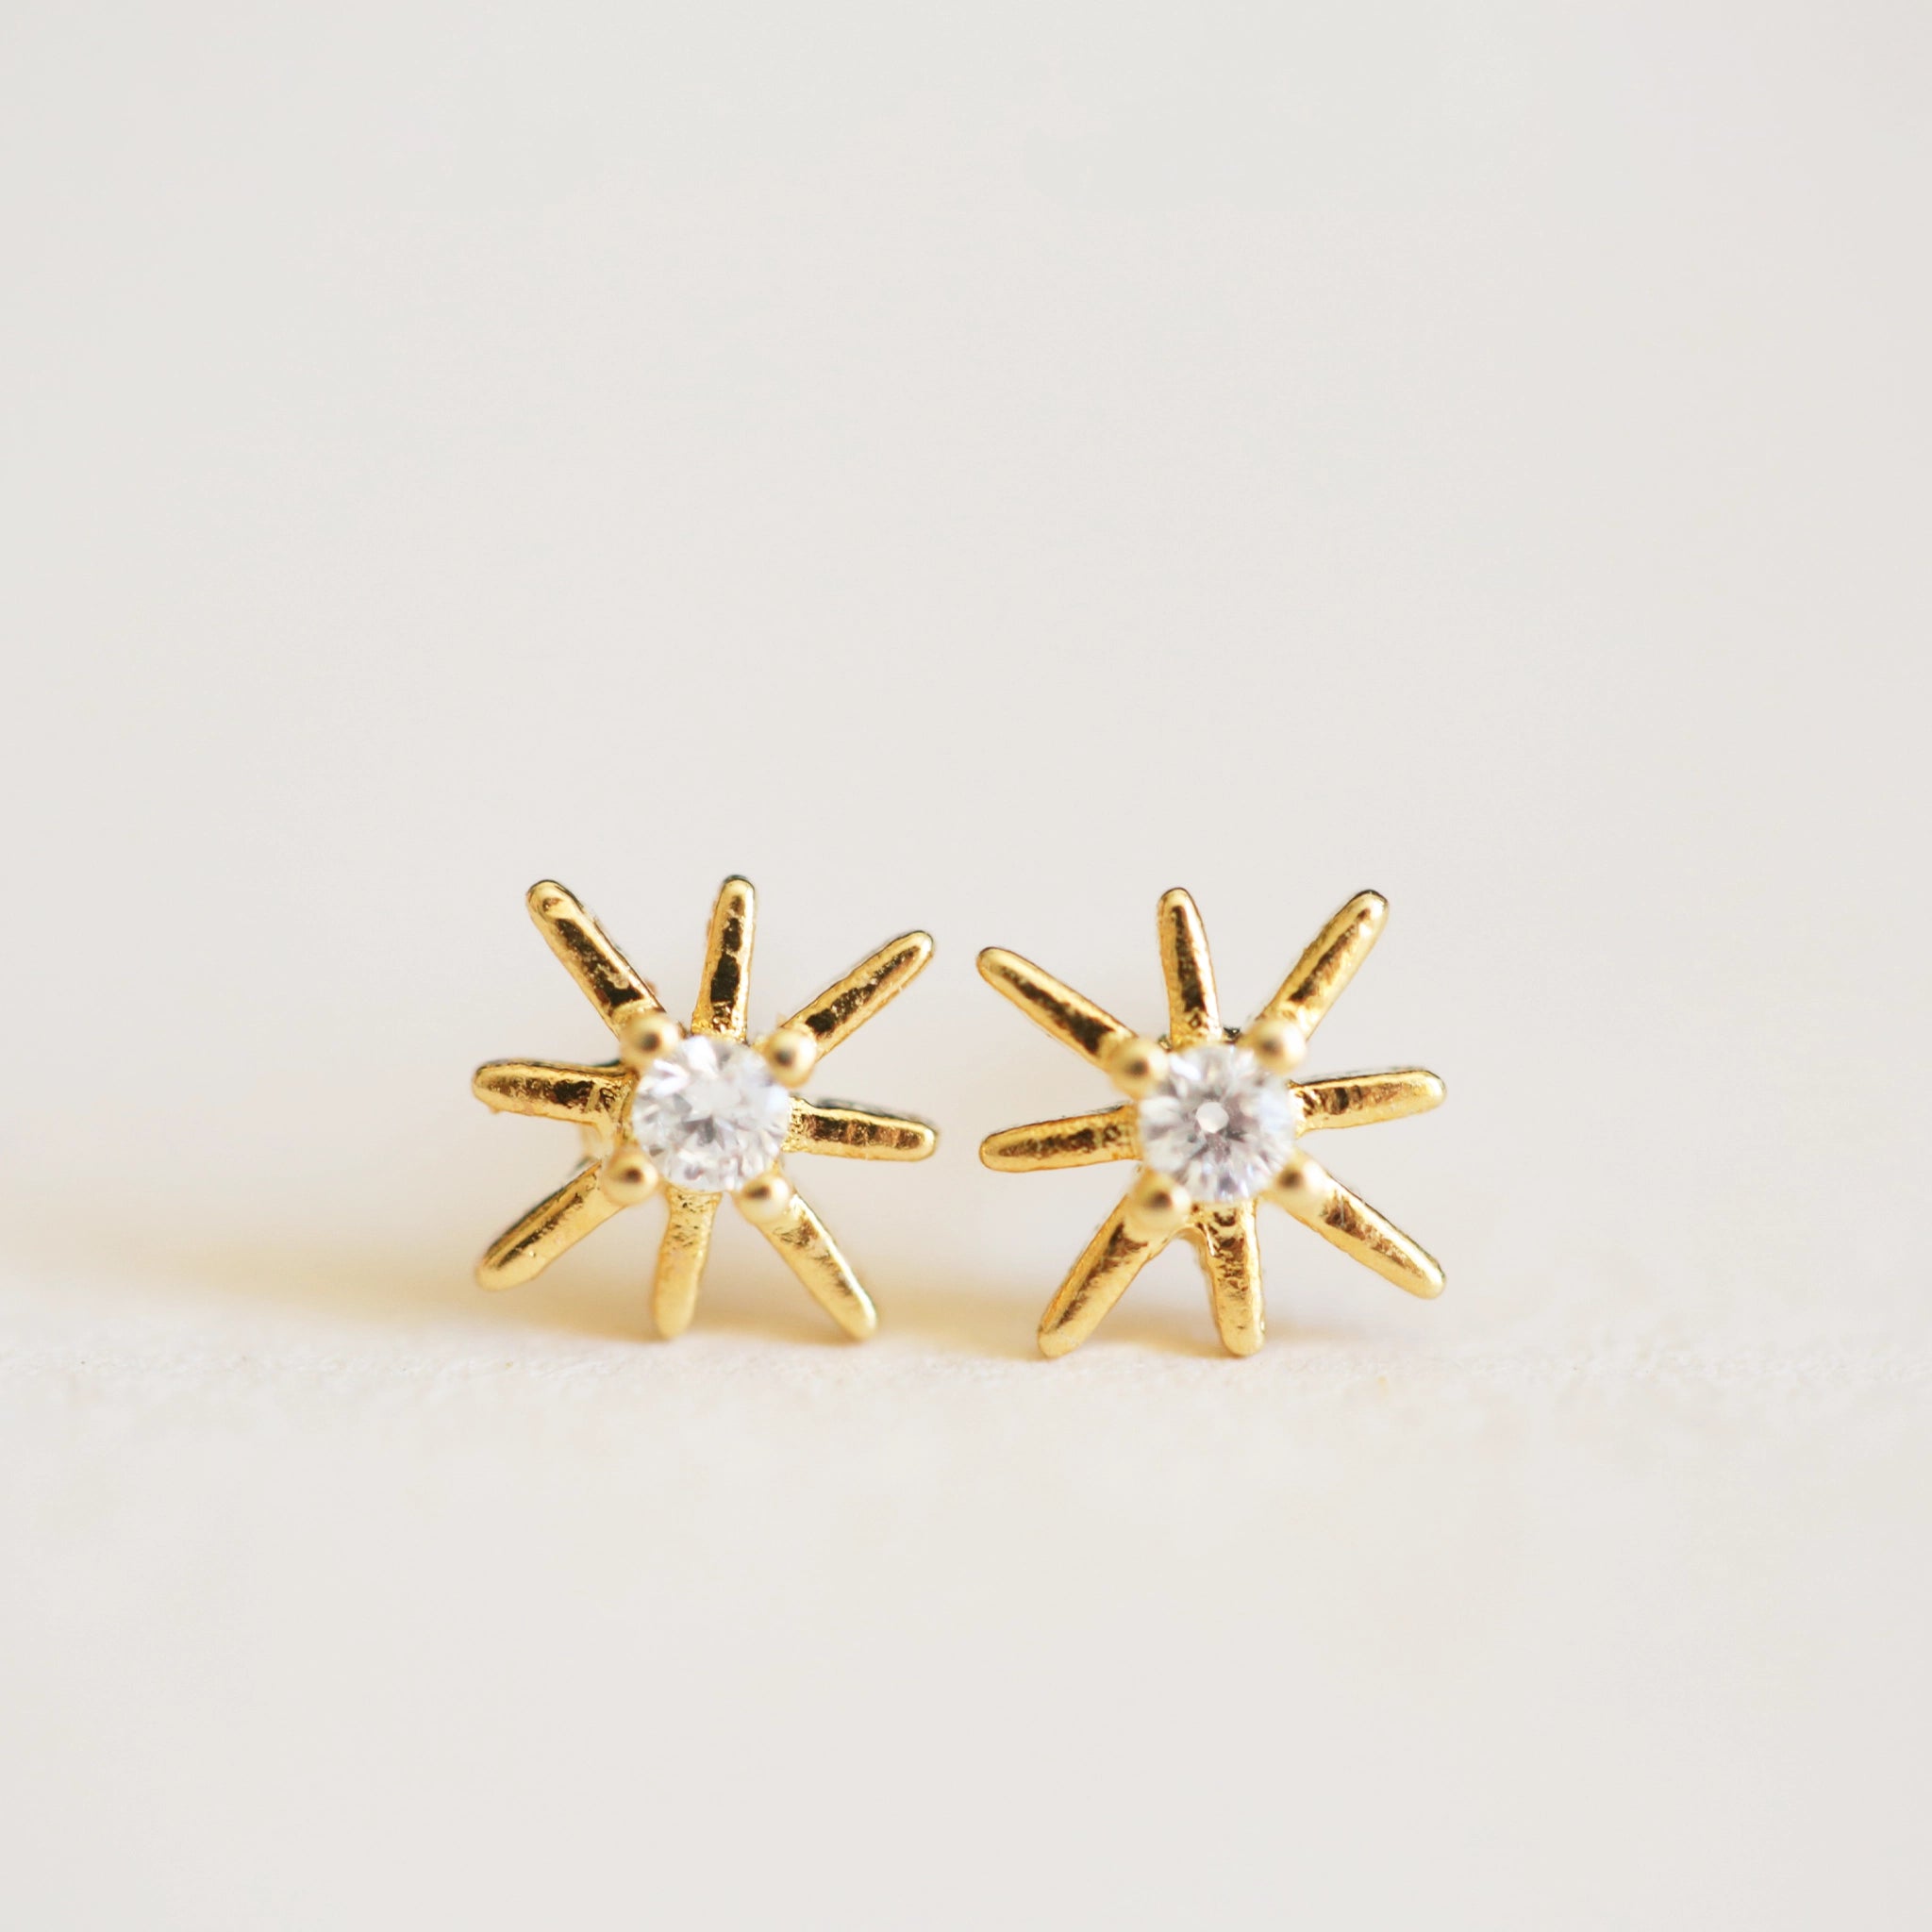 On an ivory background is a pair of dainty gold star earrings with a CZ stone in the center.